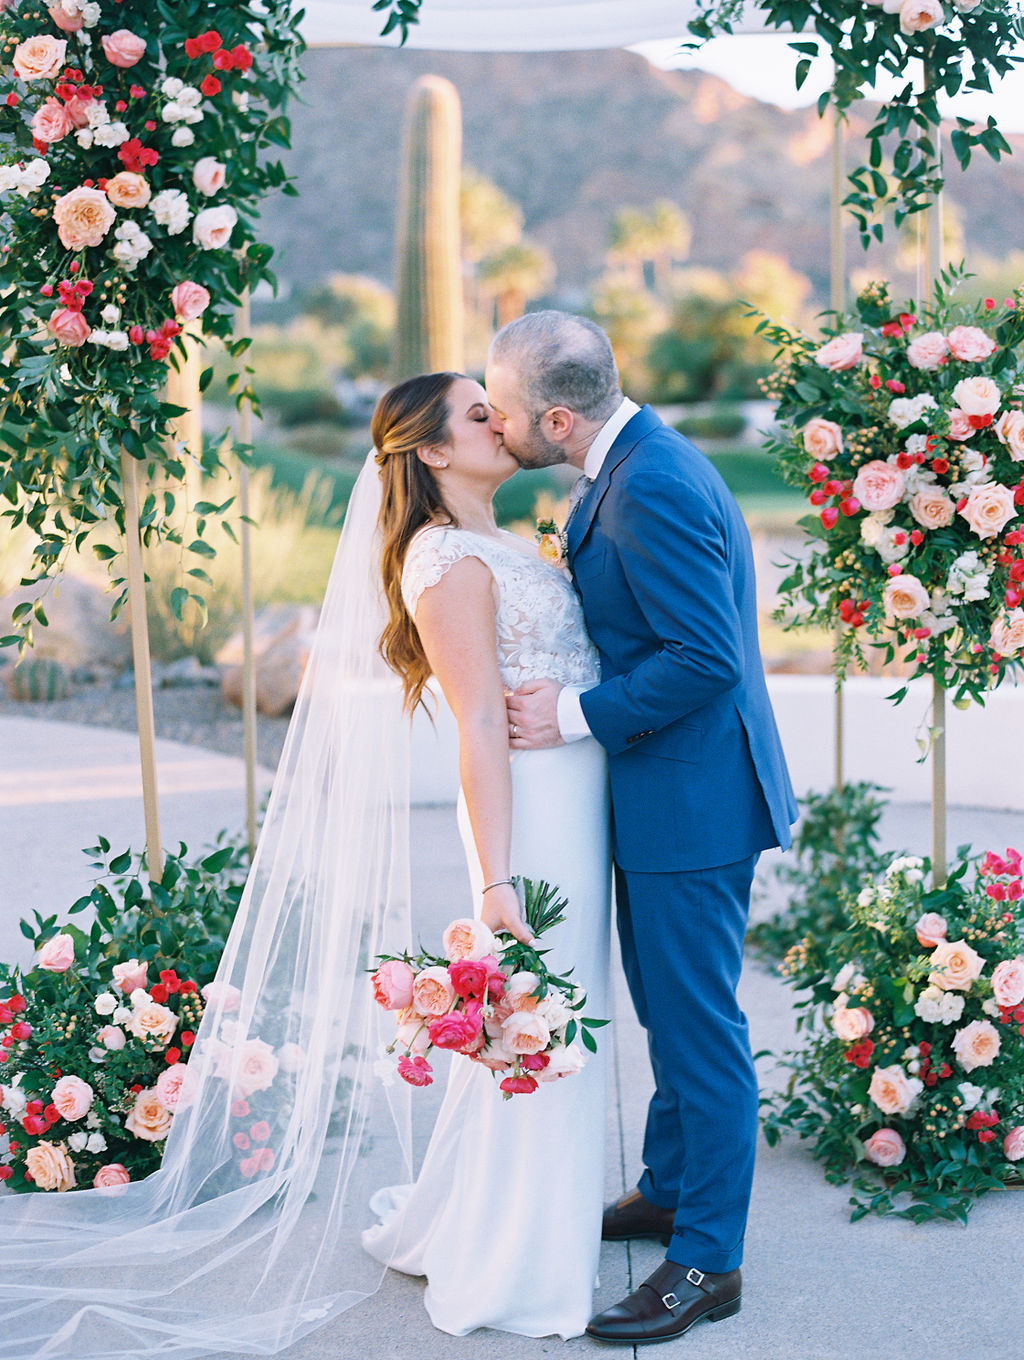 Bride and groom kissing under chuppah with floral installations of pink and peach flowers.